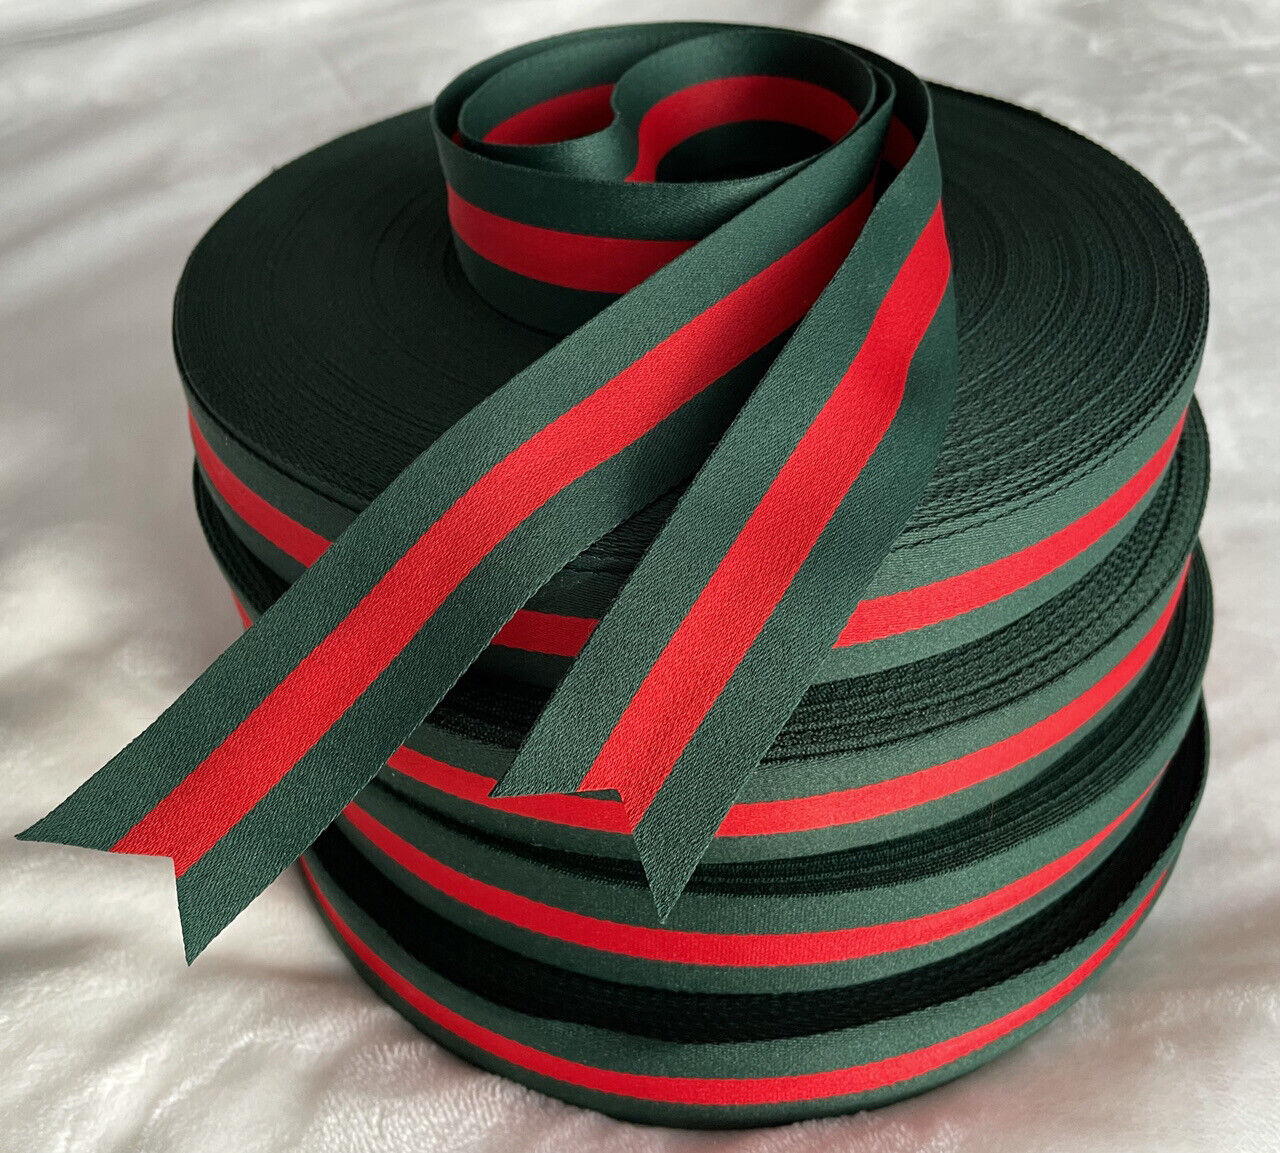 2 Yards 1.5 Inch Gucci-Style Twill Ribbon Red/Green